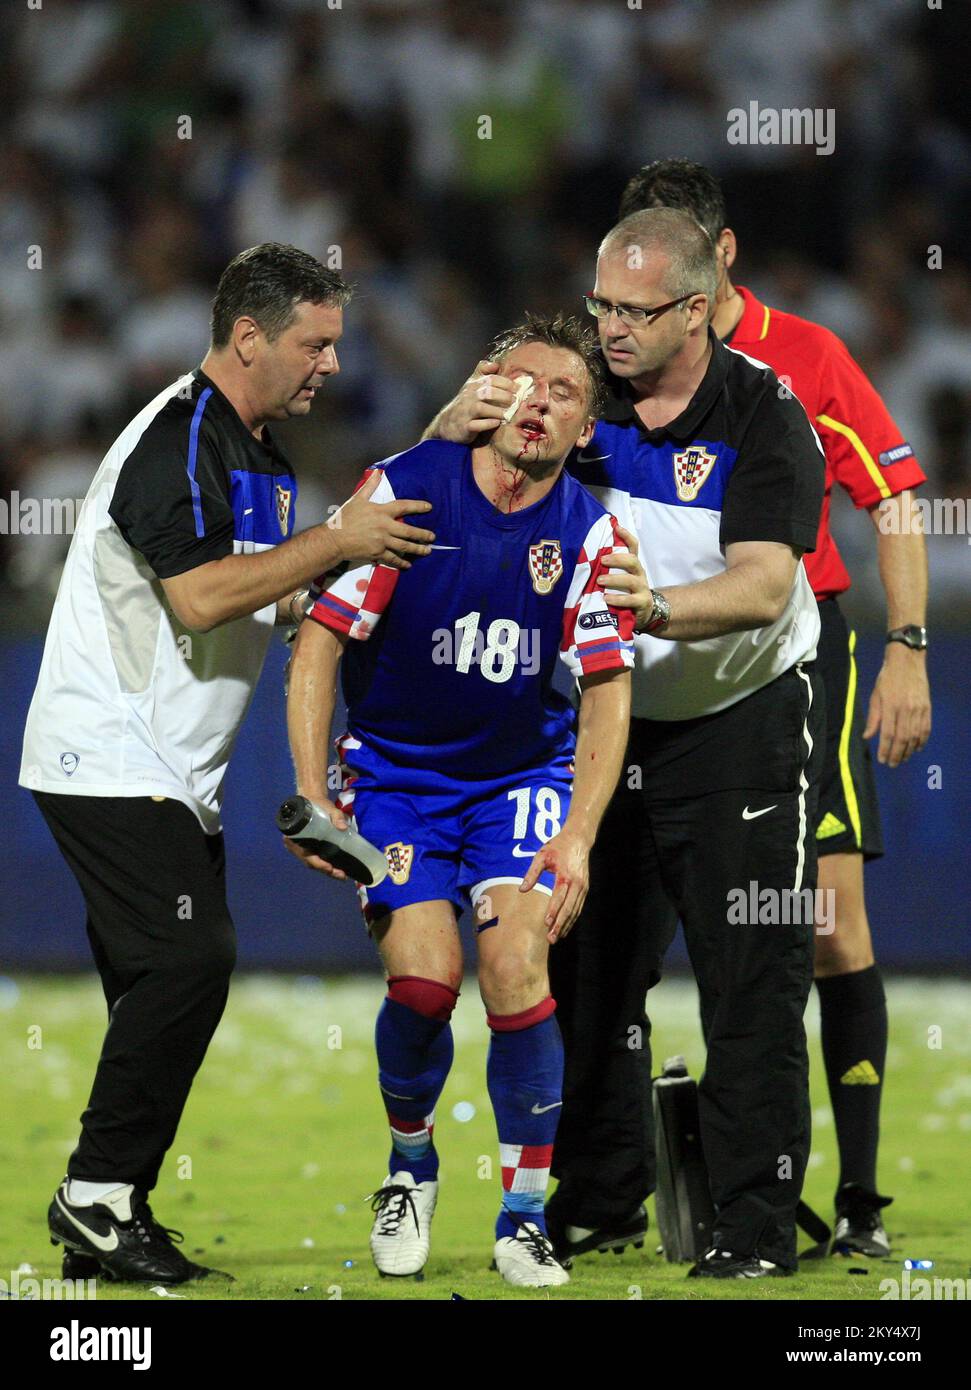 Croatia's Ivica Olic leaves the pitch after sustaining an injury. Stock Photo